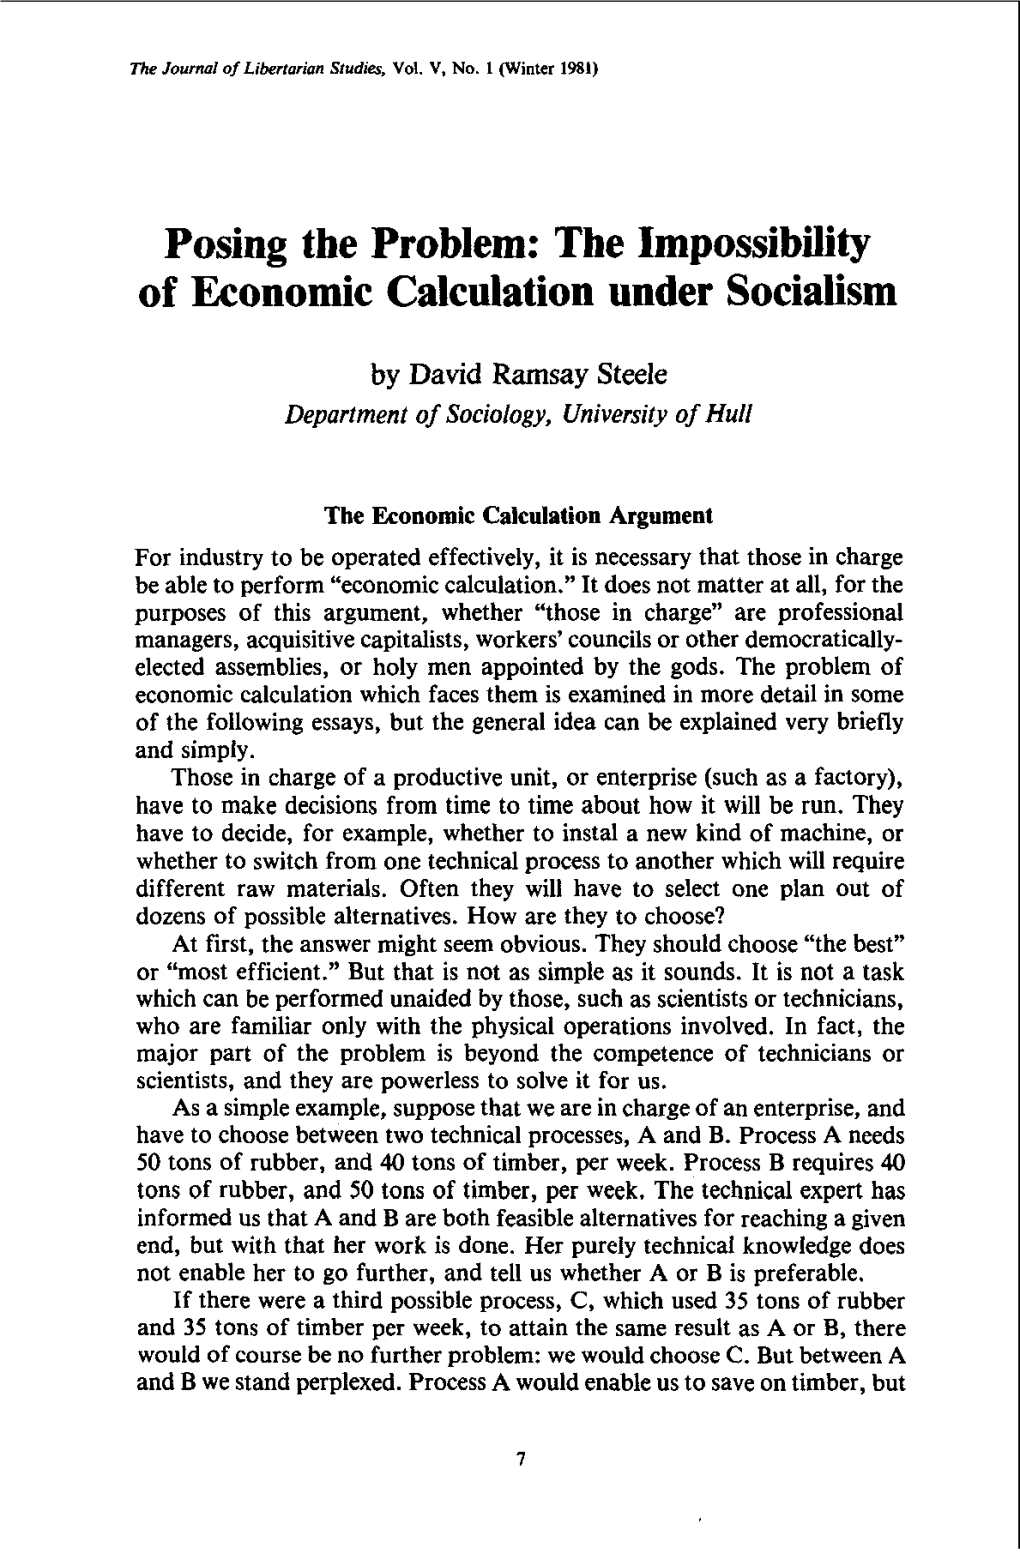 The Impossibility of Economic Calculation Under Socialism